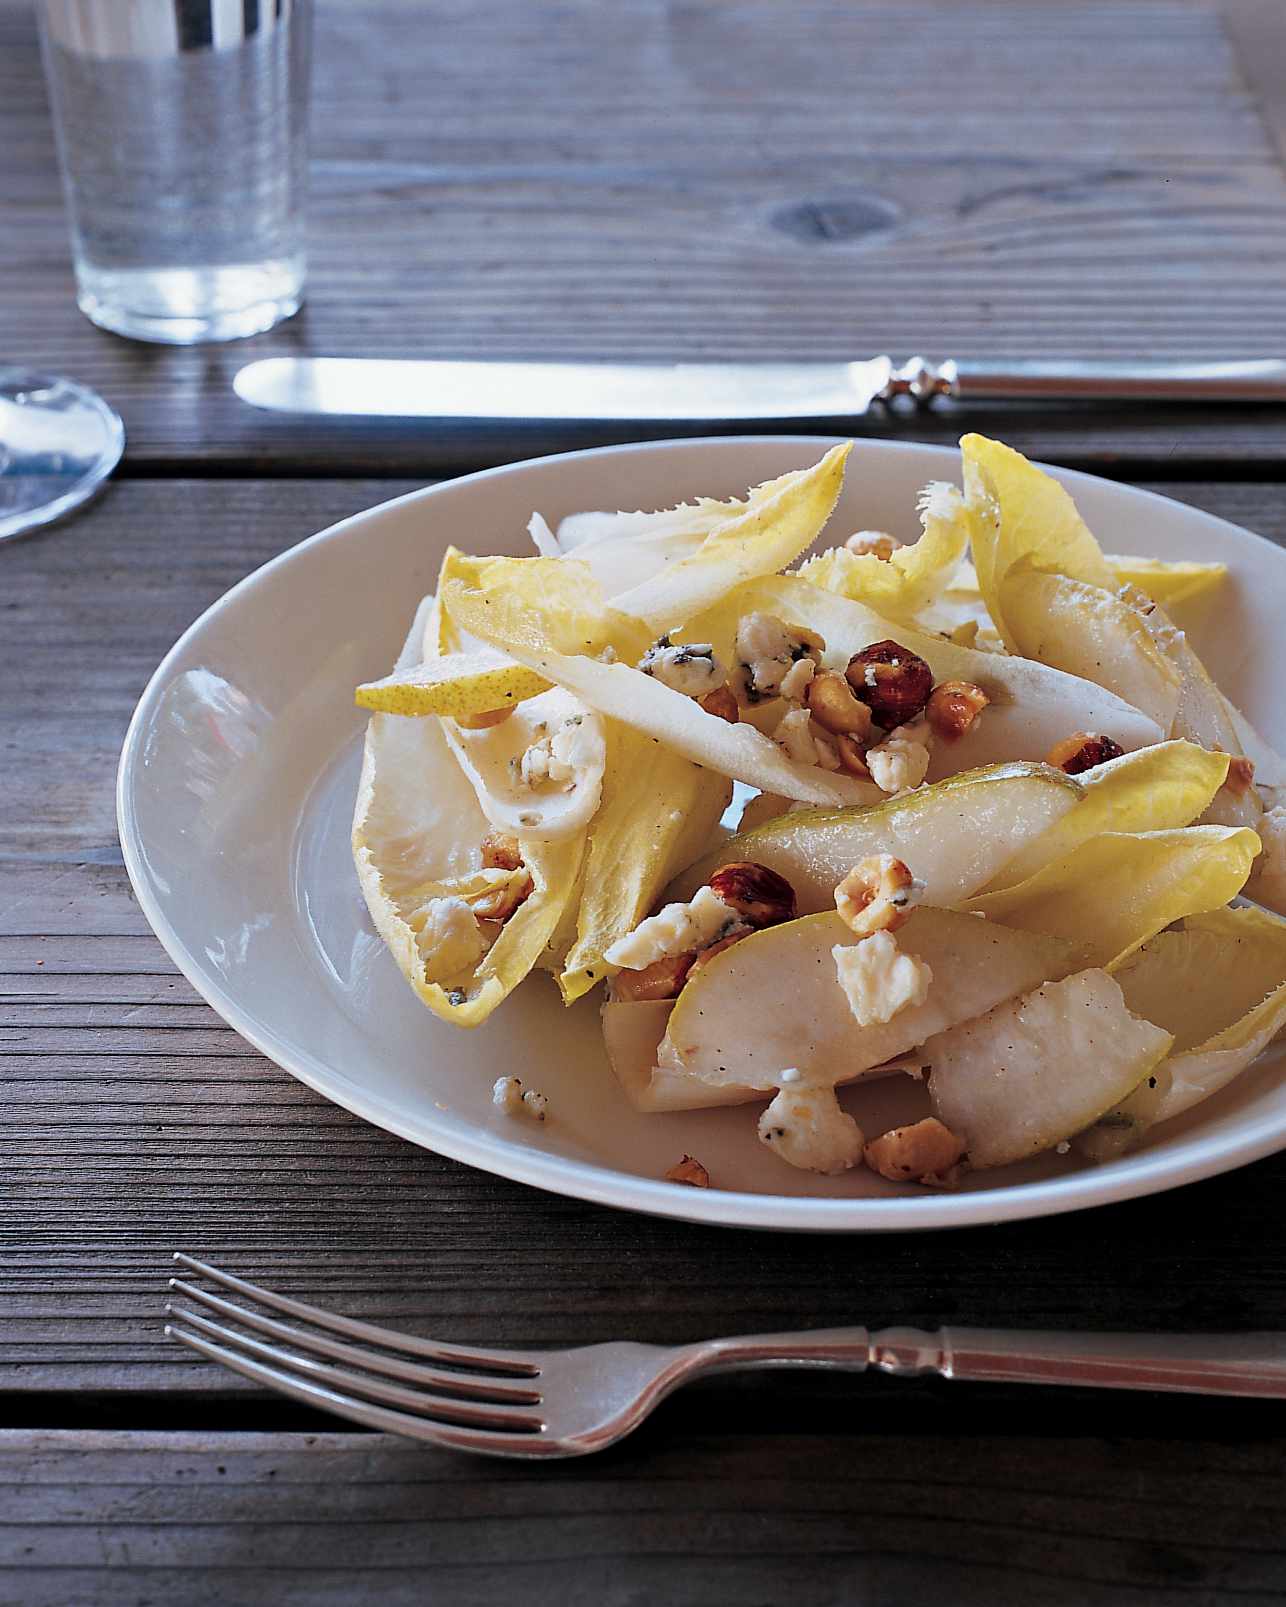 Endive and Pear Salad with Oregon Blue Cheese and Hazelnuts